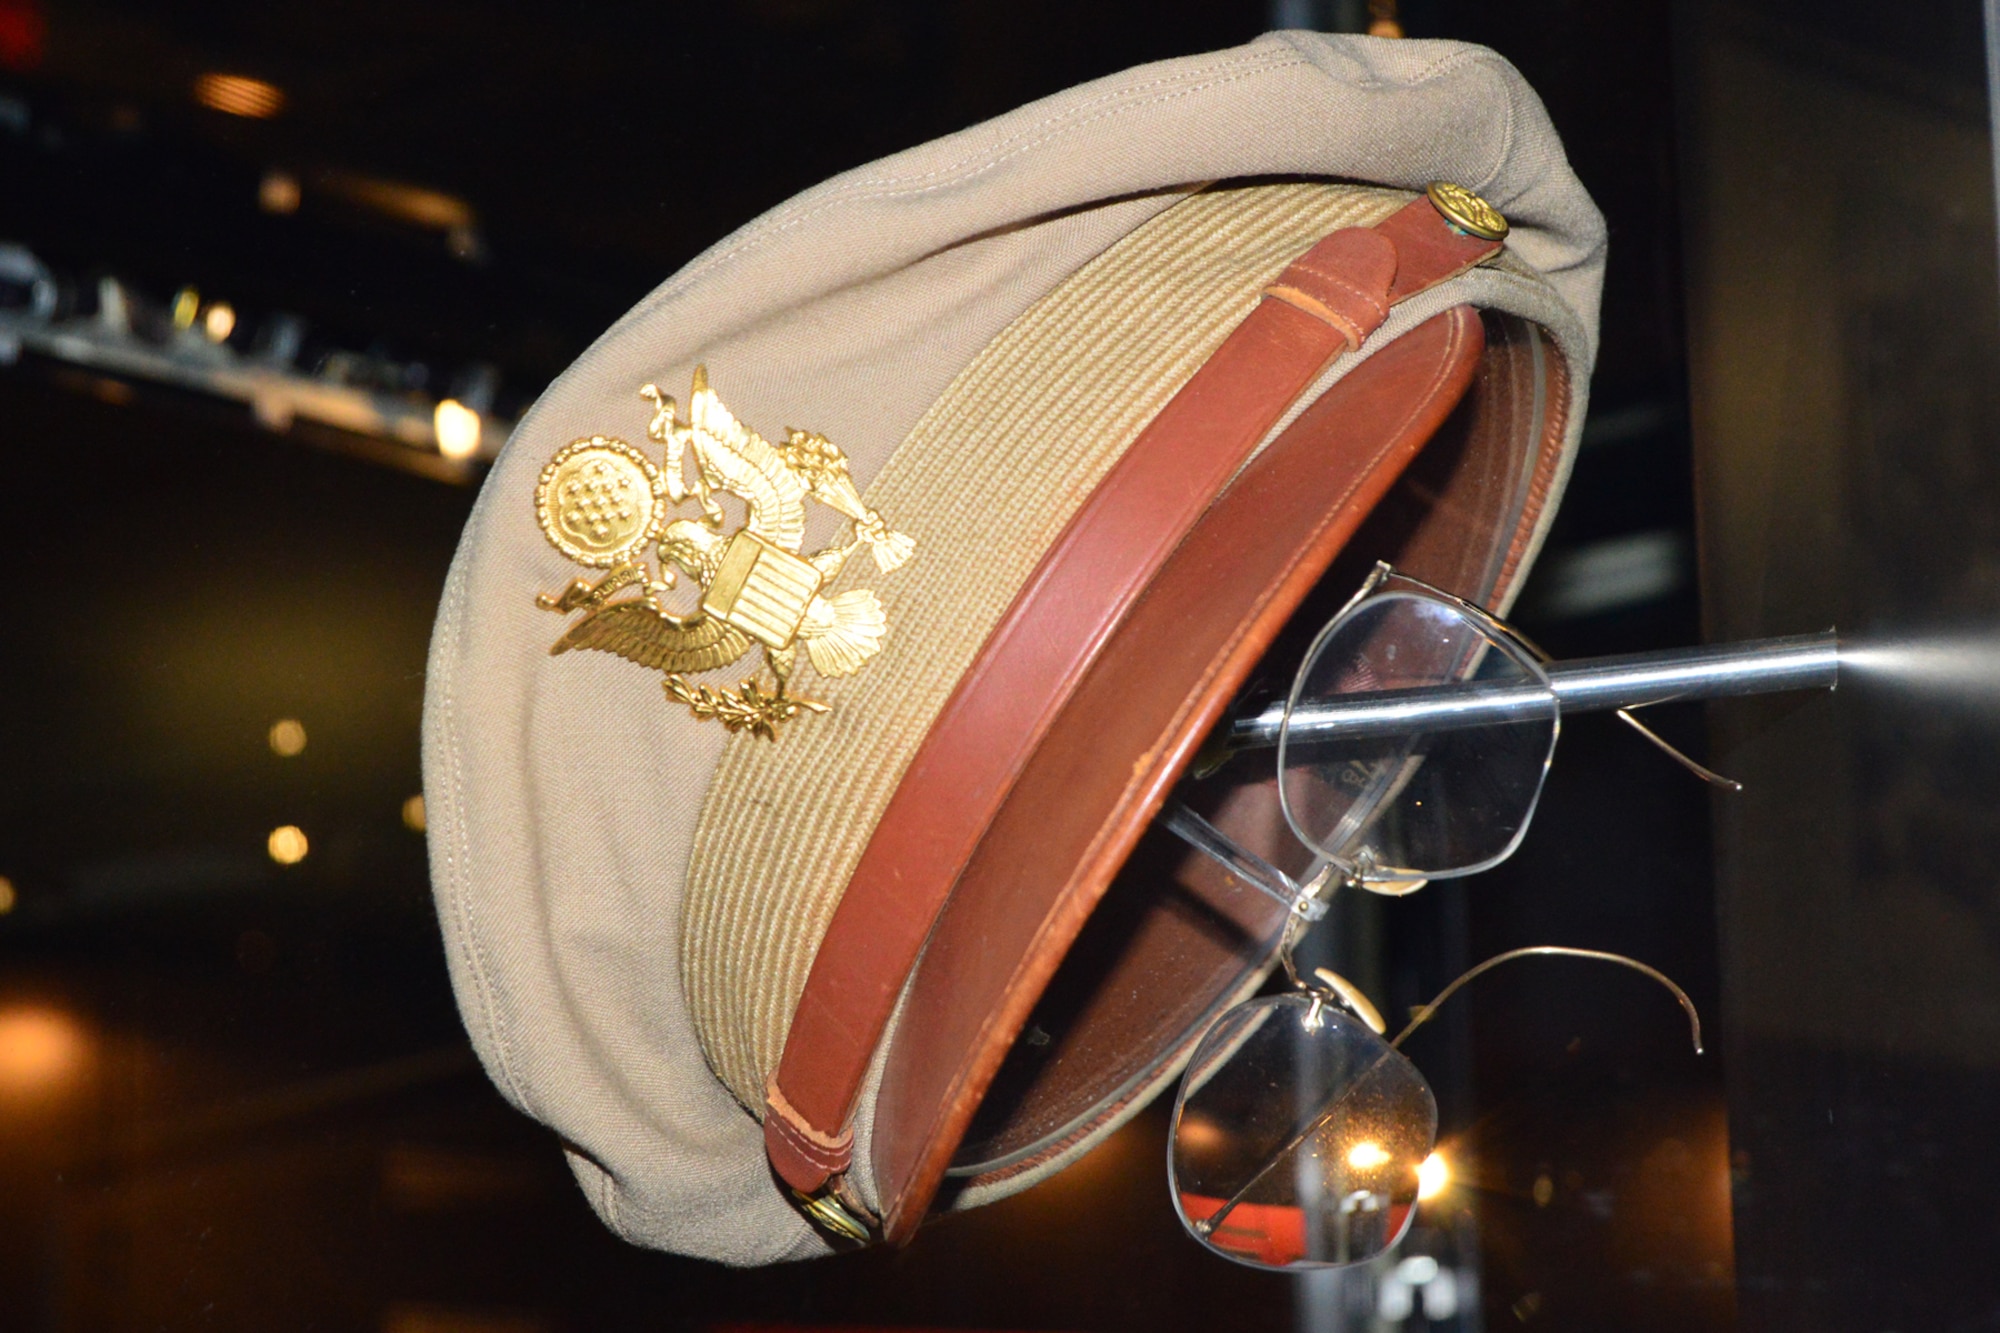 Maj. Glenn Miller's summer uniform cap and spare eyeglasses on display in the World War II Gallery at the National Museum of the United States Air Force. (U.S. Air Force photo)